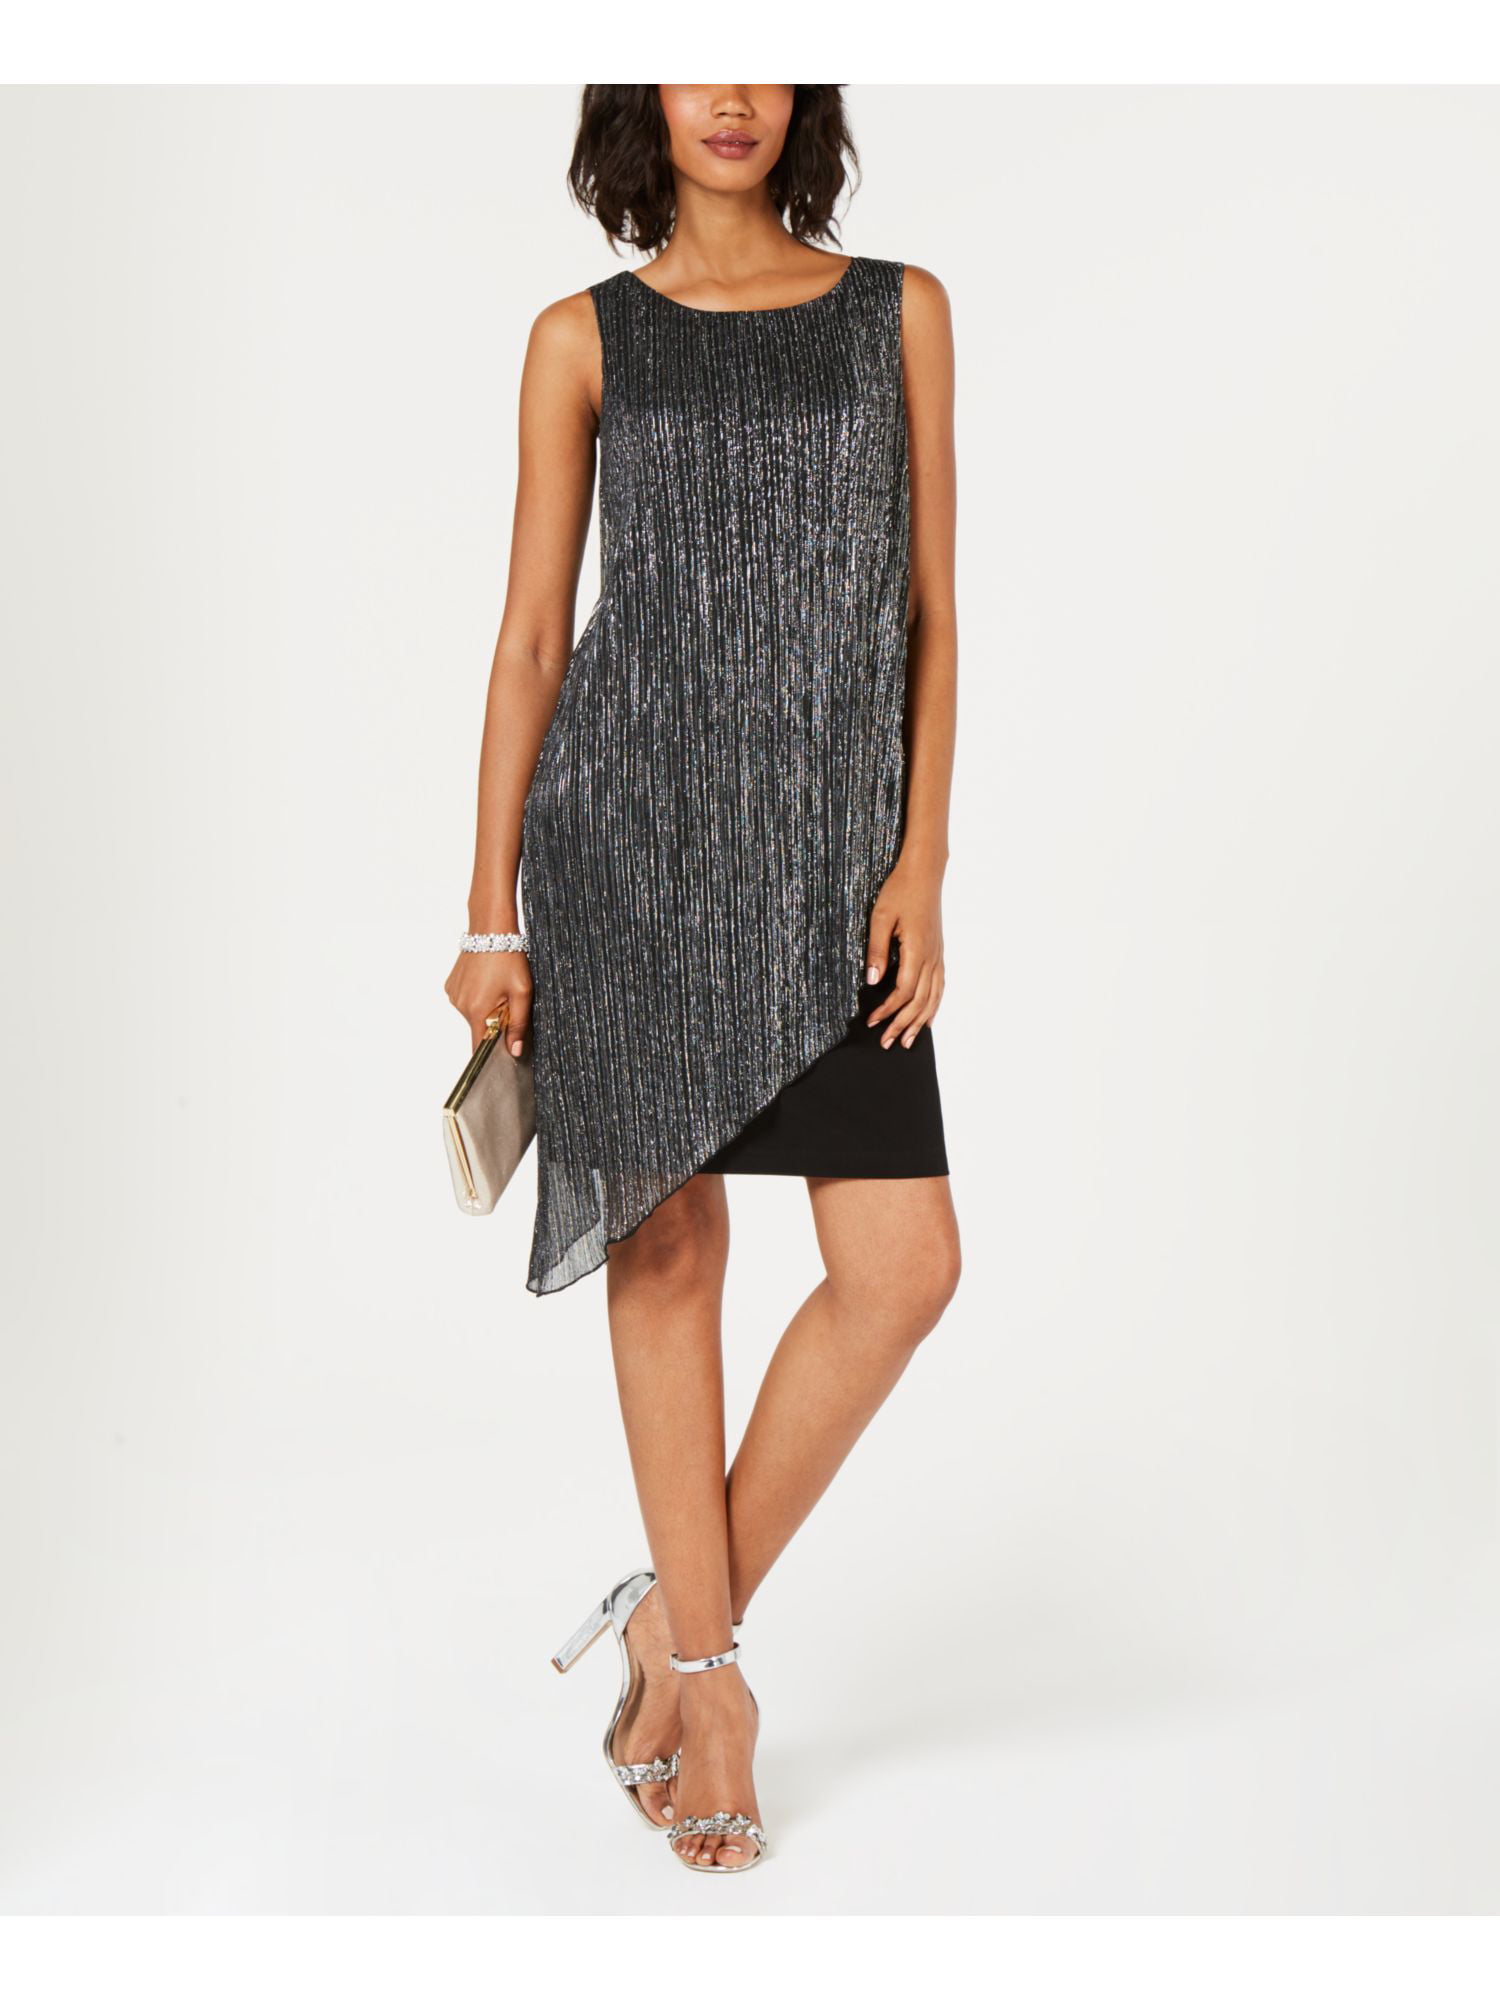 Connected Apparel Womens Metallic Ribbed Knit Cocktail Dress BHFO 0383